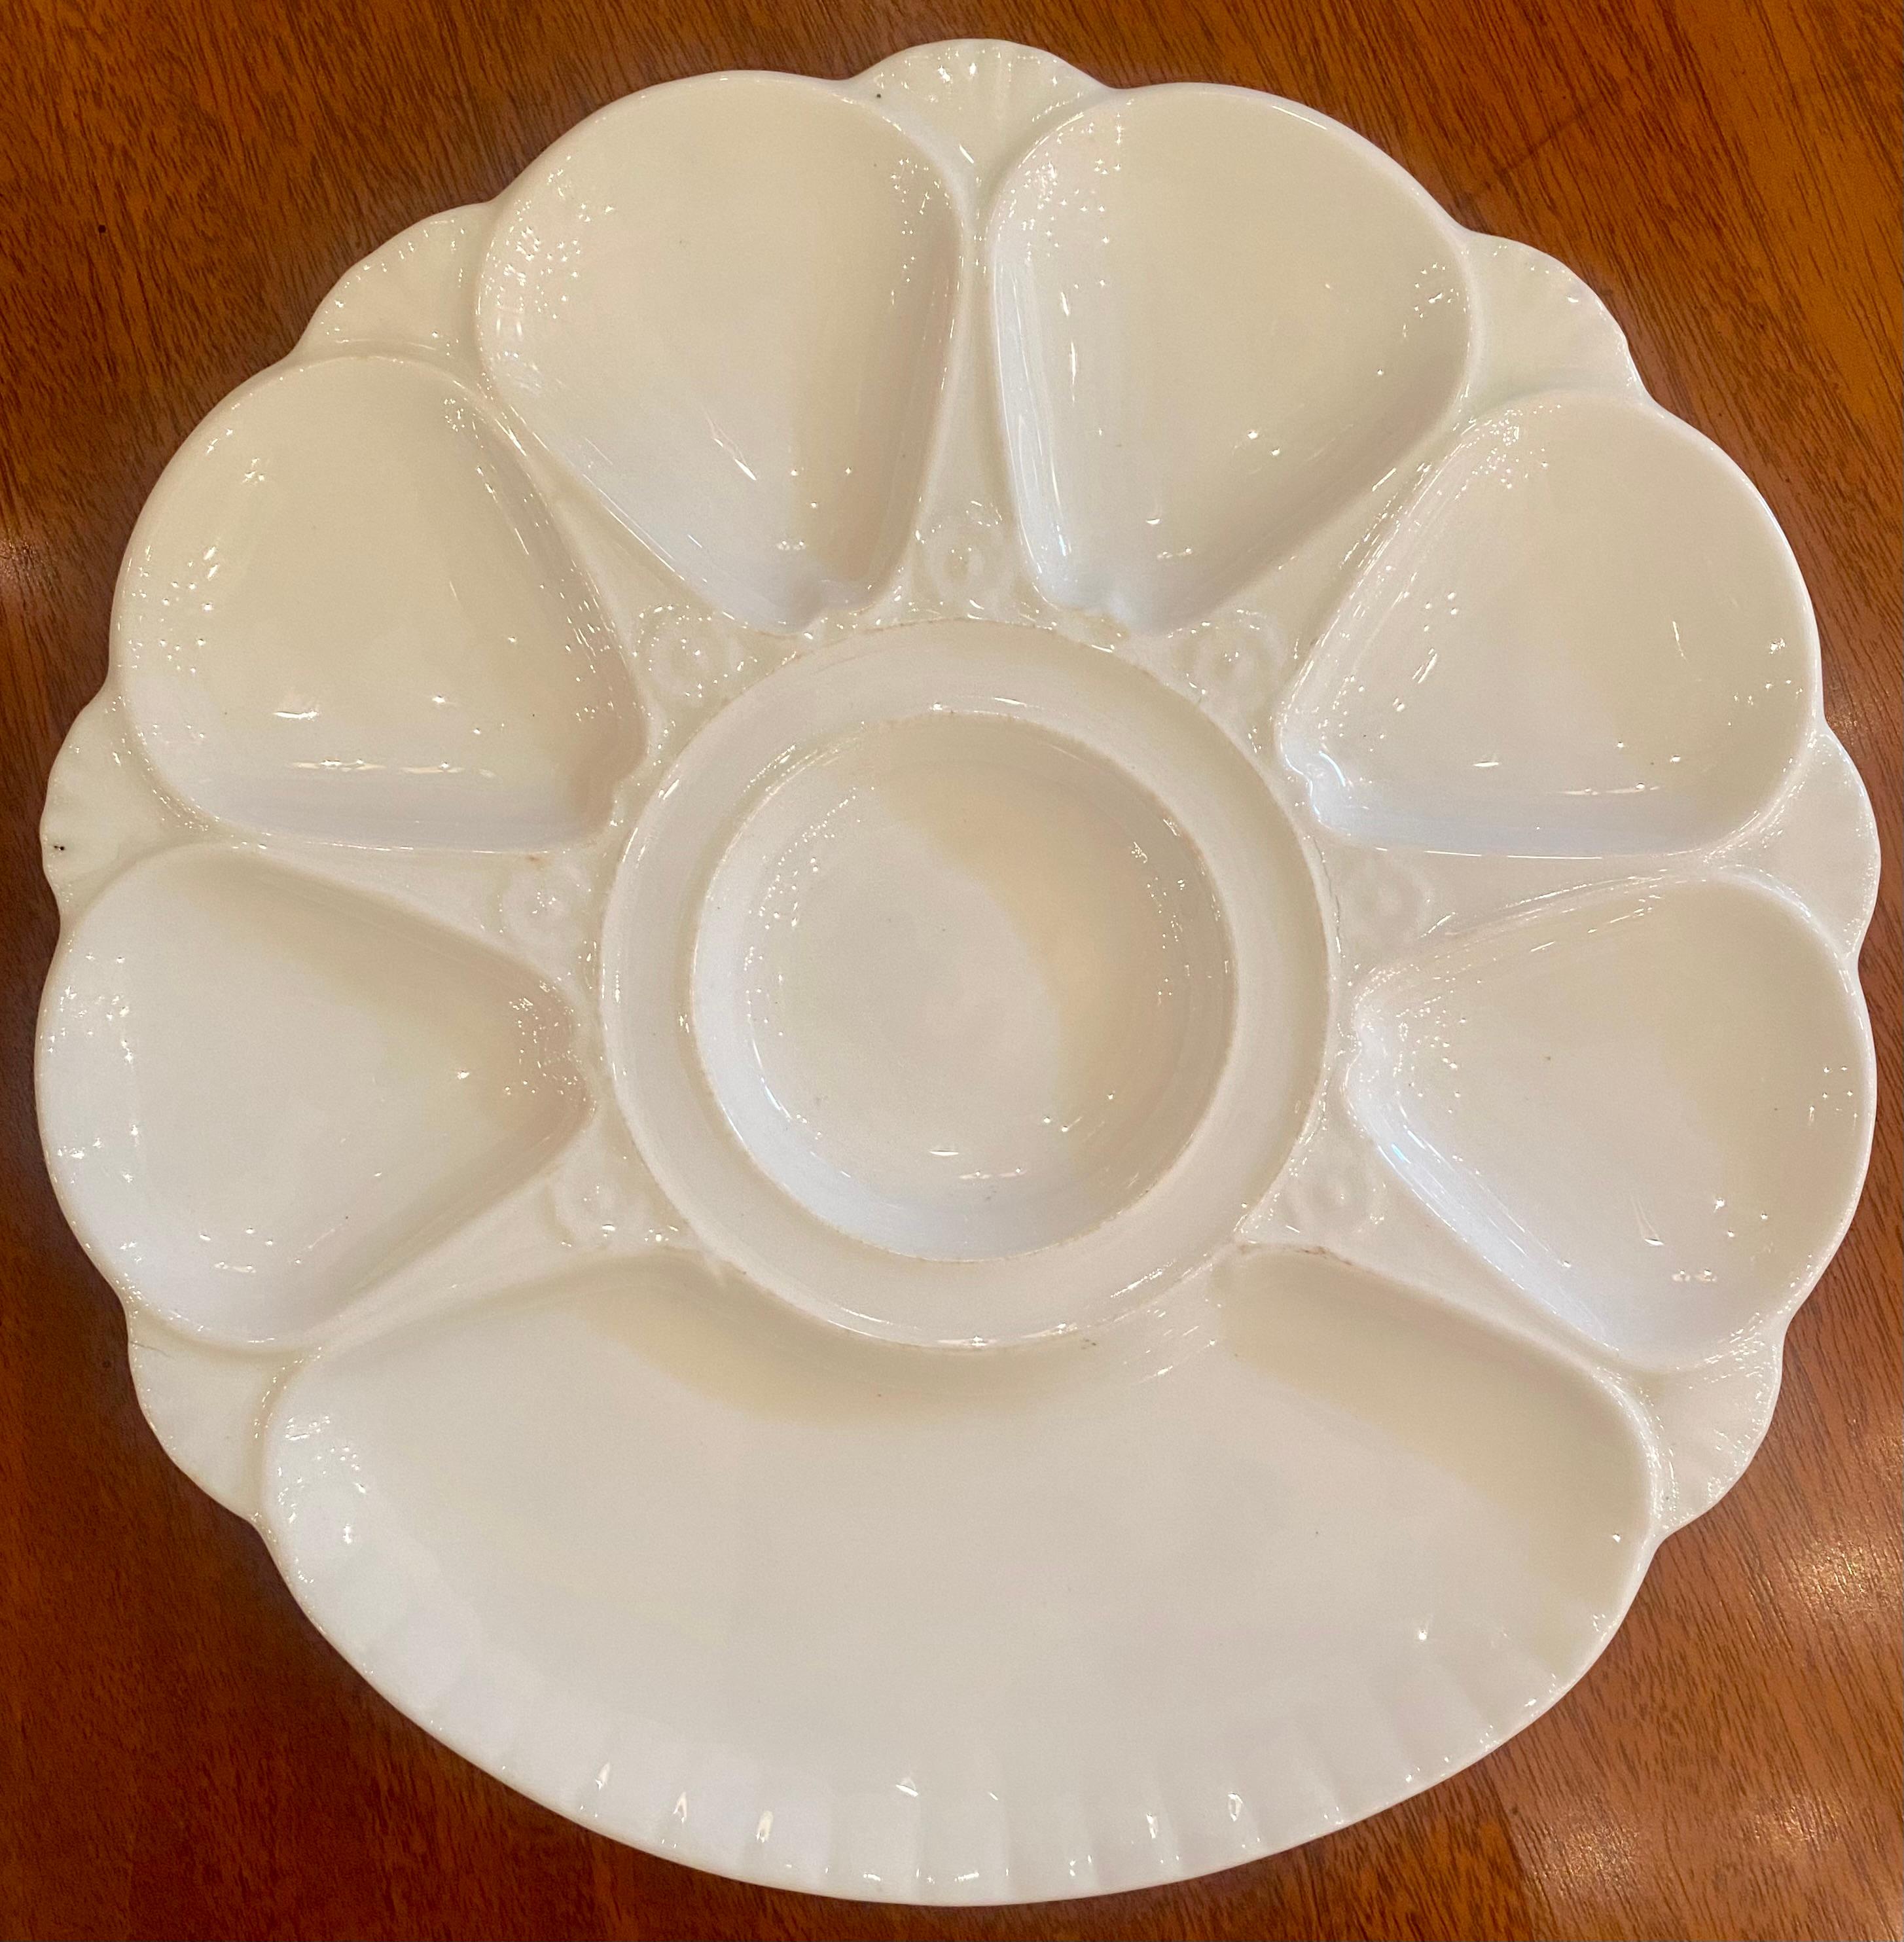 Rare antique English Minton Majolica all white porcelain oyster plate with large cracker well, Circa 1870's.